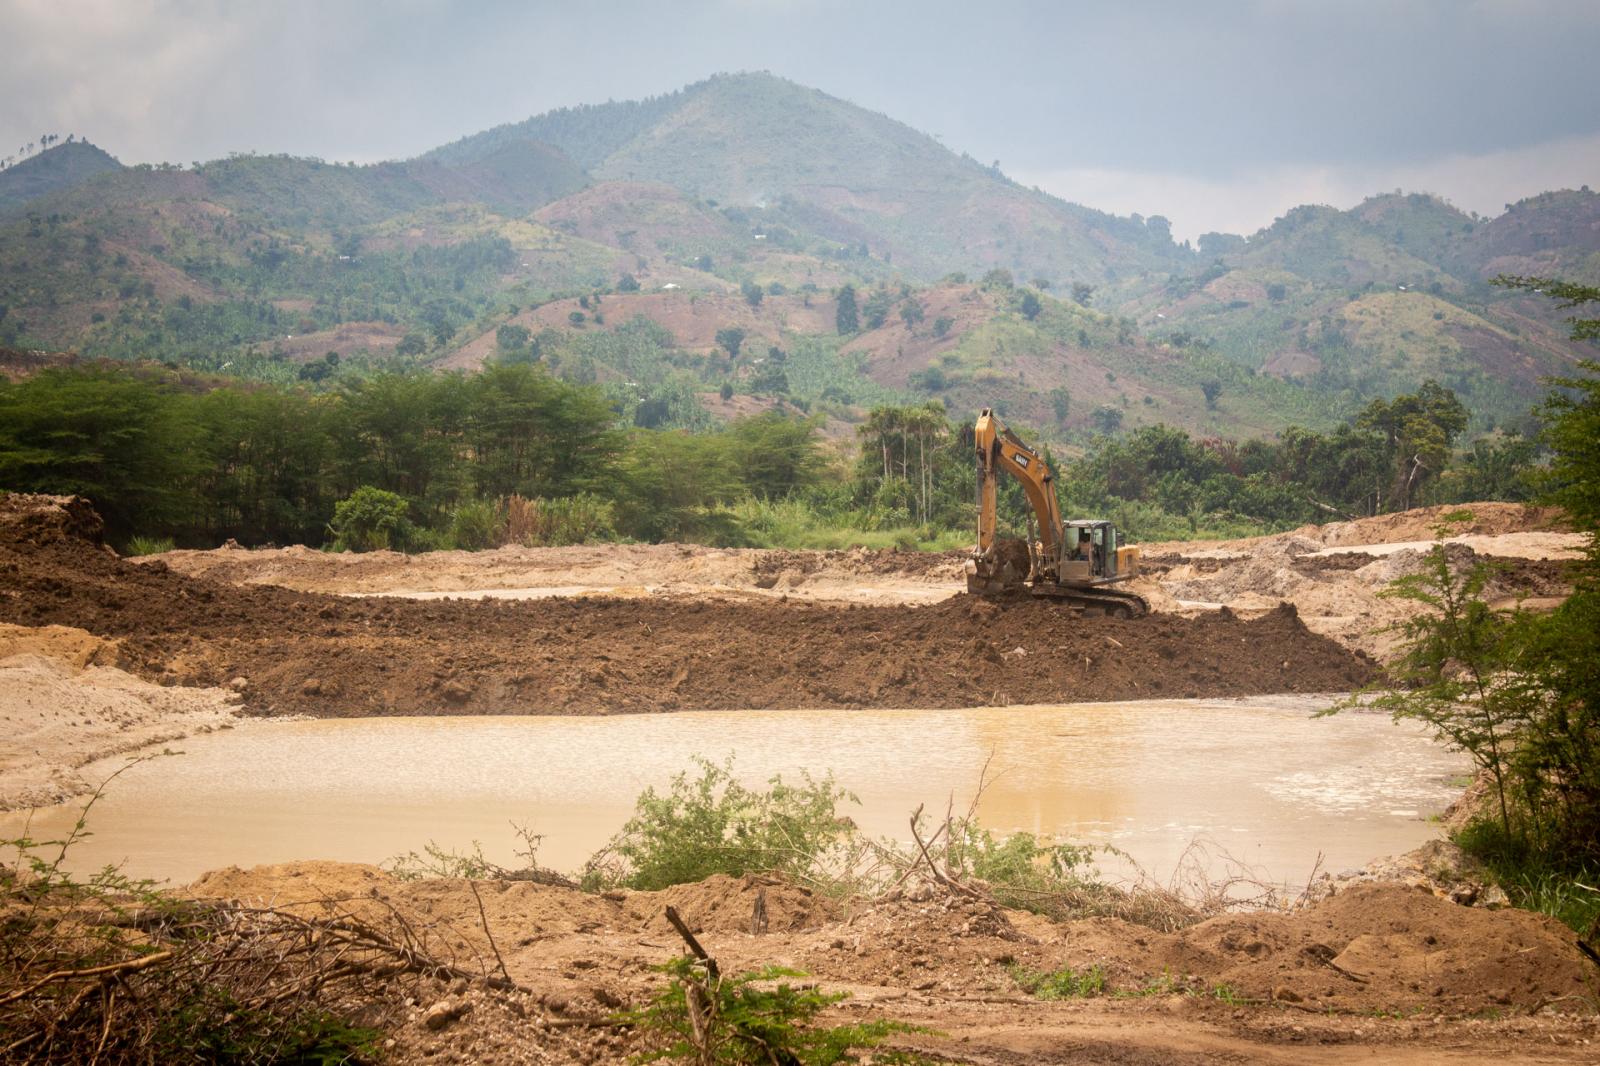 Image from Vanessa Mulondo | A Passion for Nature - Gold mining in Kyambura National Park.